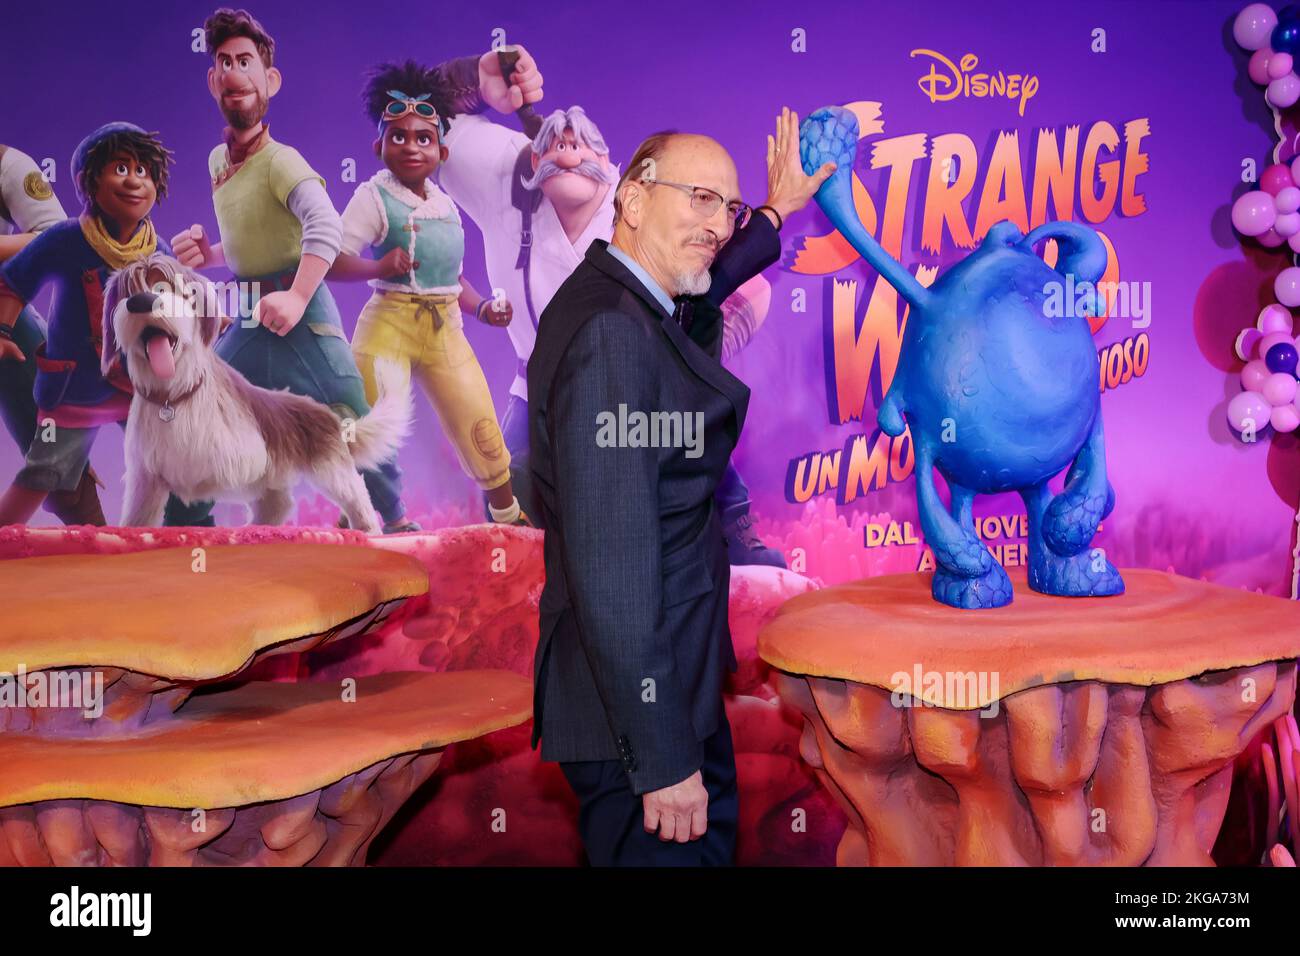 Rome, Italy - 21 Nov 2022: The producer Don Hall attend the red carpet of the premiere of the Disney movie 'Strange World - Un Mondo Misterioso' at The Space Cinema Moderno. Rome, Italy. Stock Photo